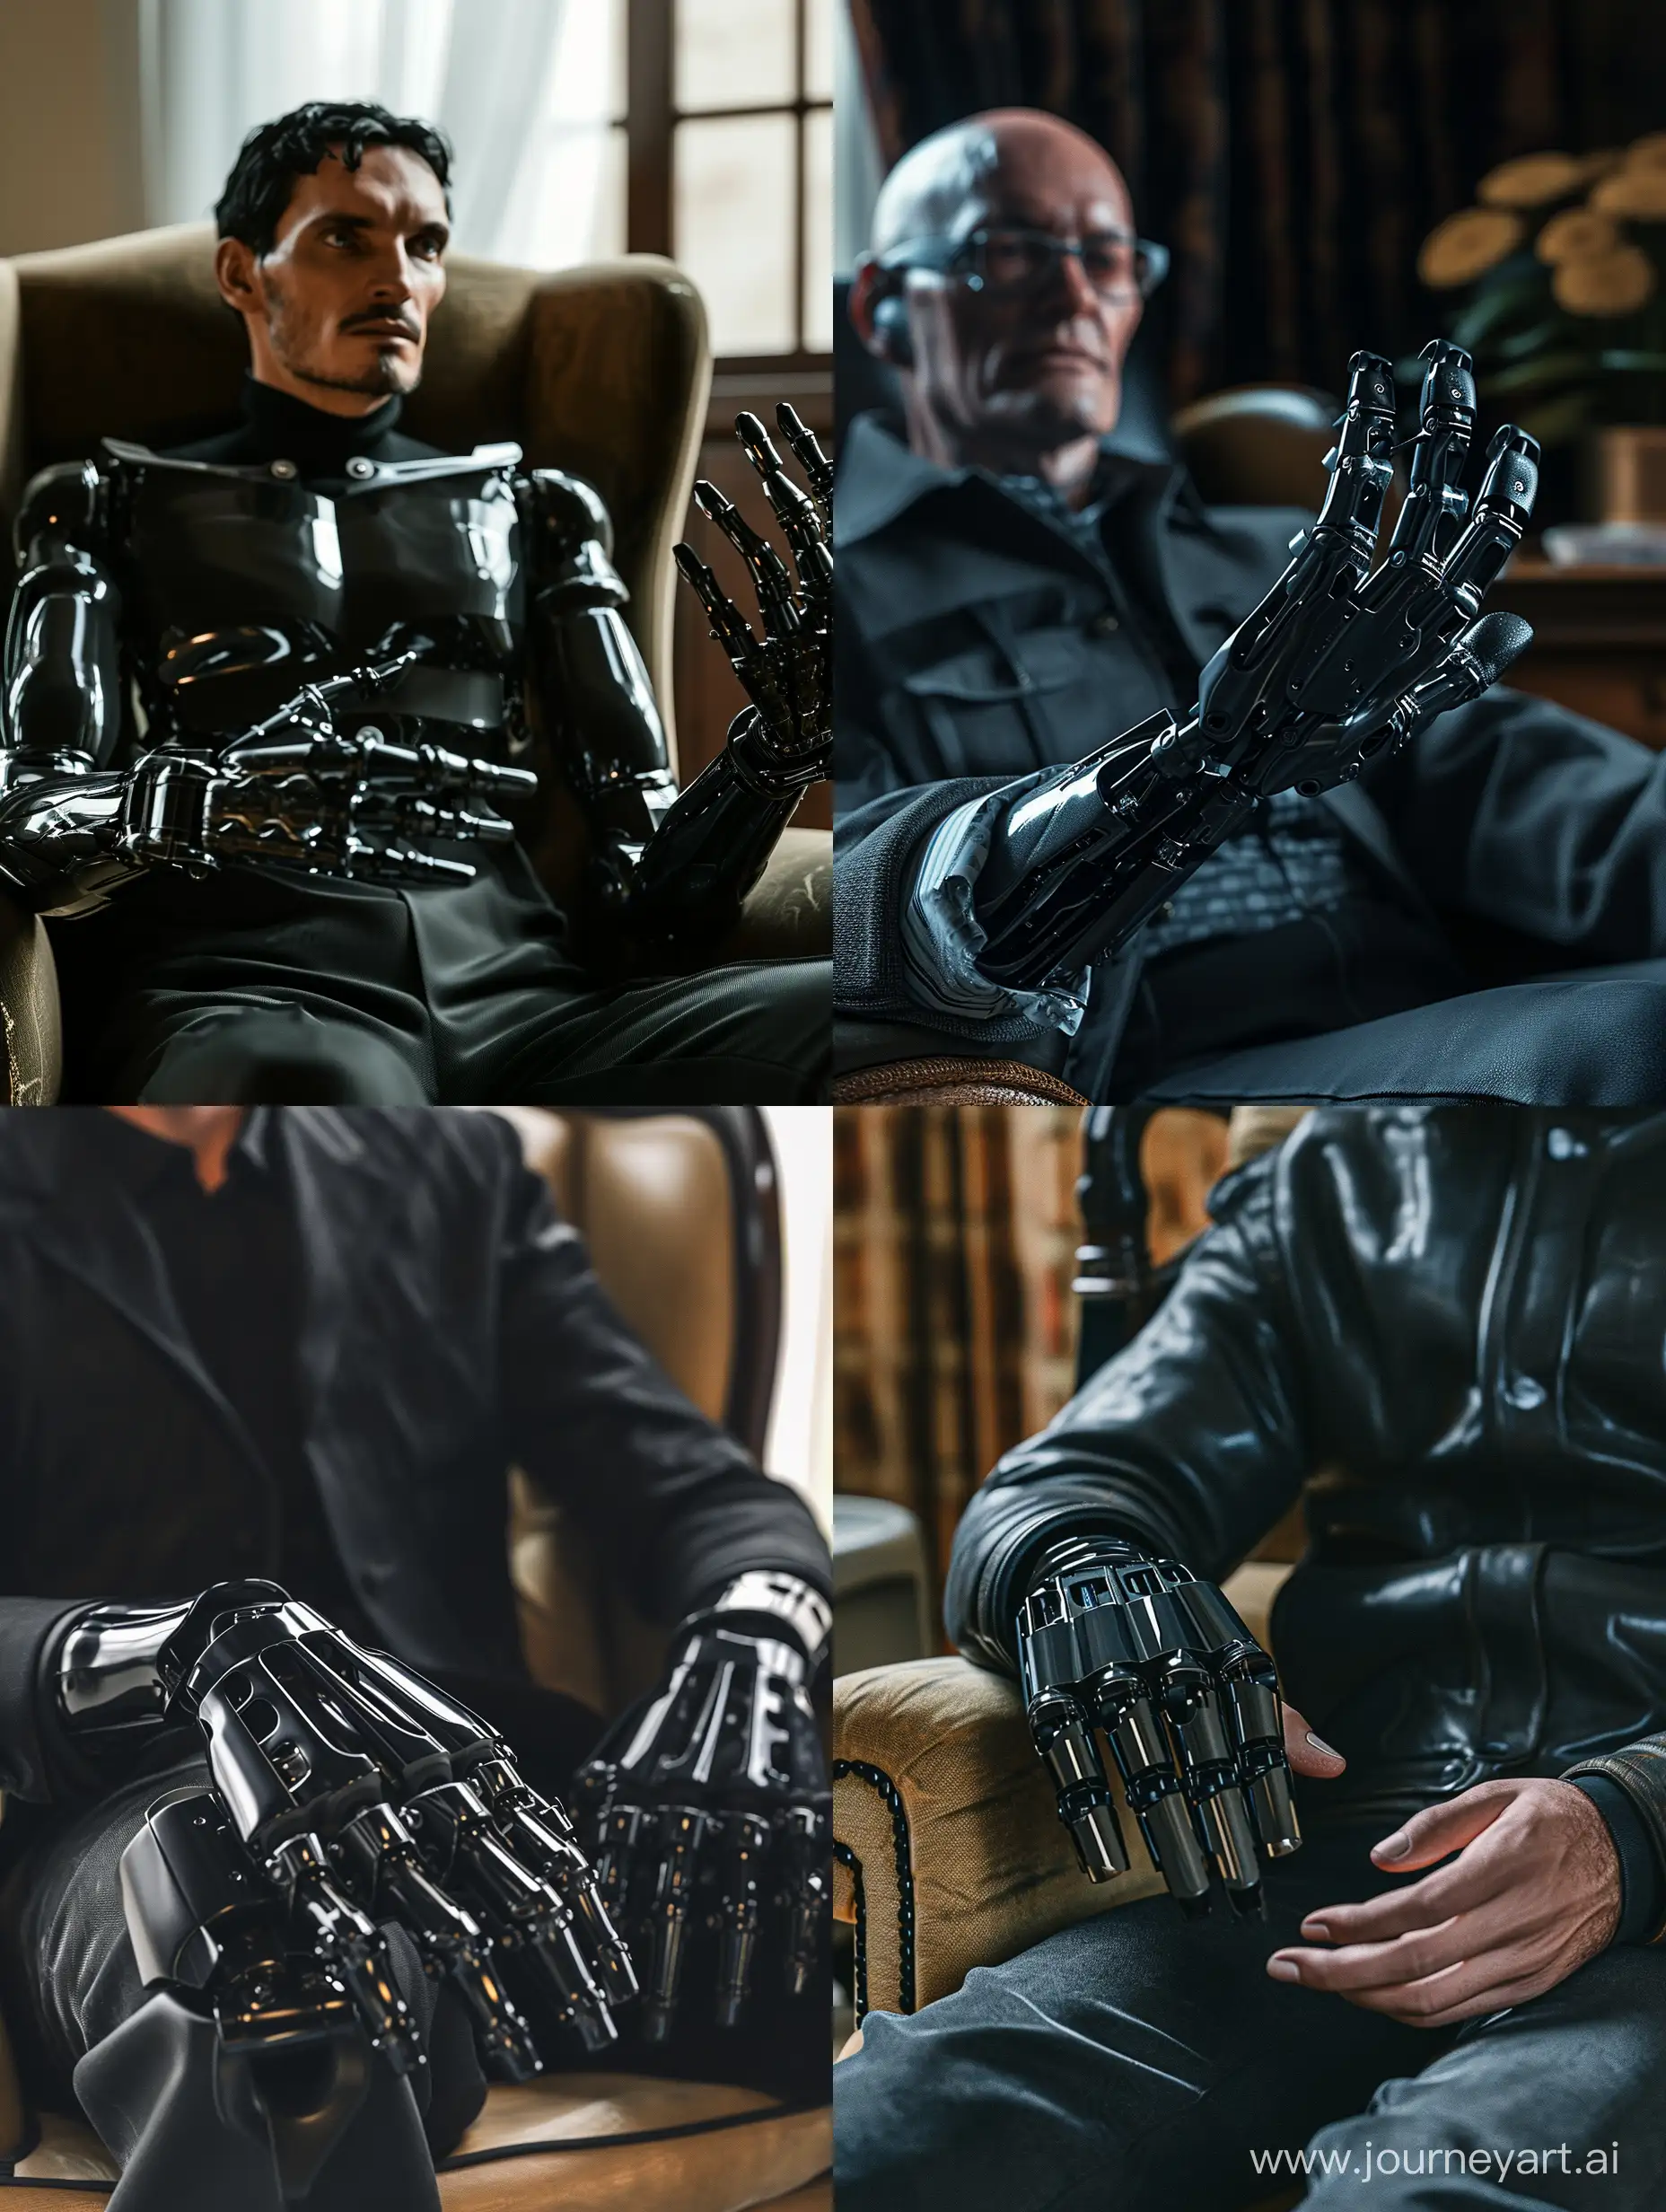 ultra-realistic and photorealistic, man sitting in an armchair showing one of his hands, shiny black mechanical prosthesis, modern style, ultra-realistic photography, high-tech, digital, masterpiece, 32k UHD resolution, high quality, professional photography

